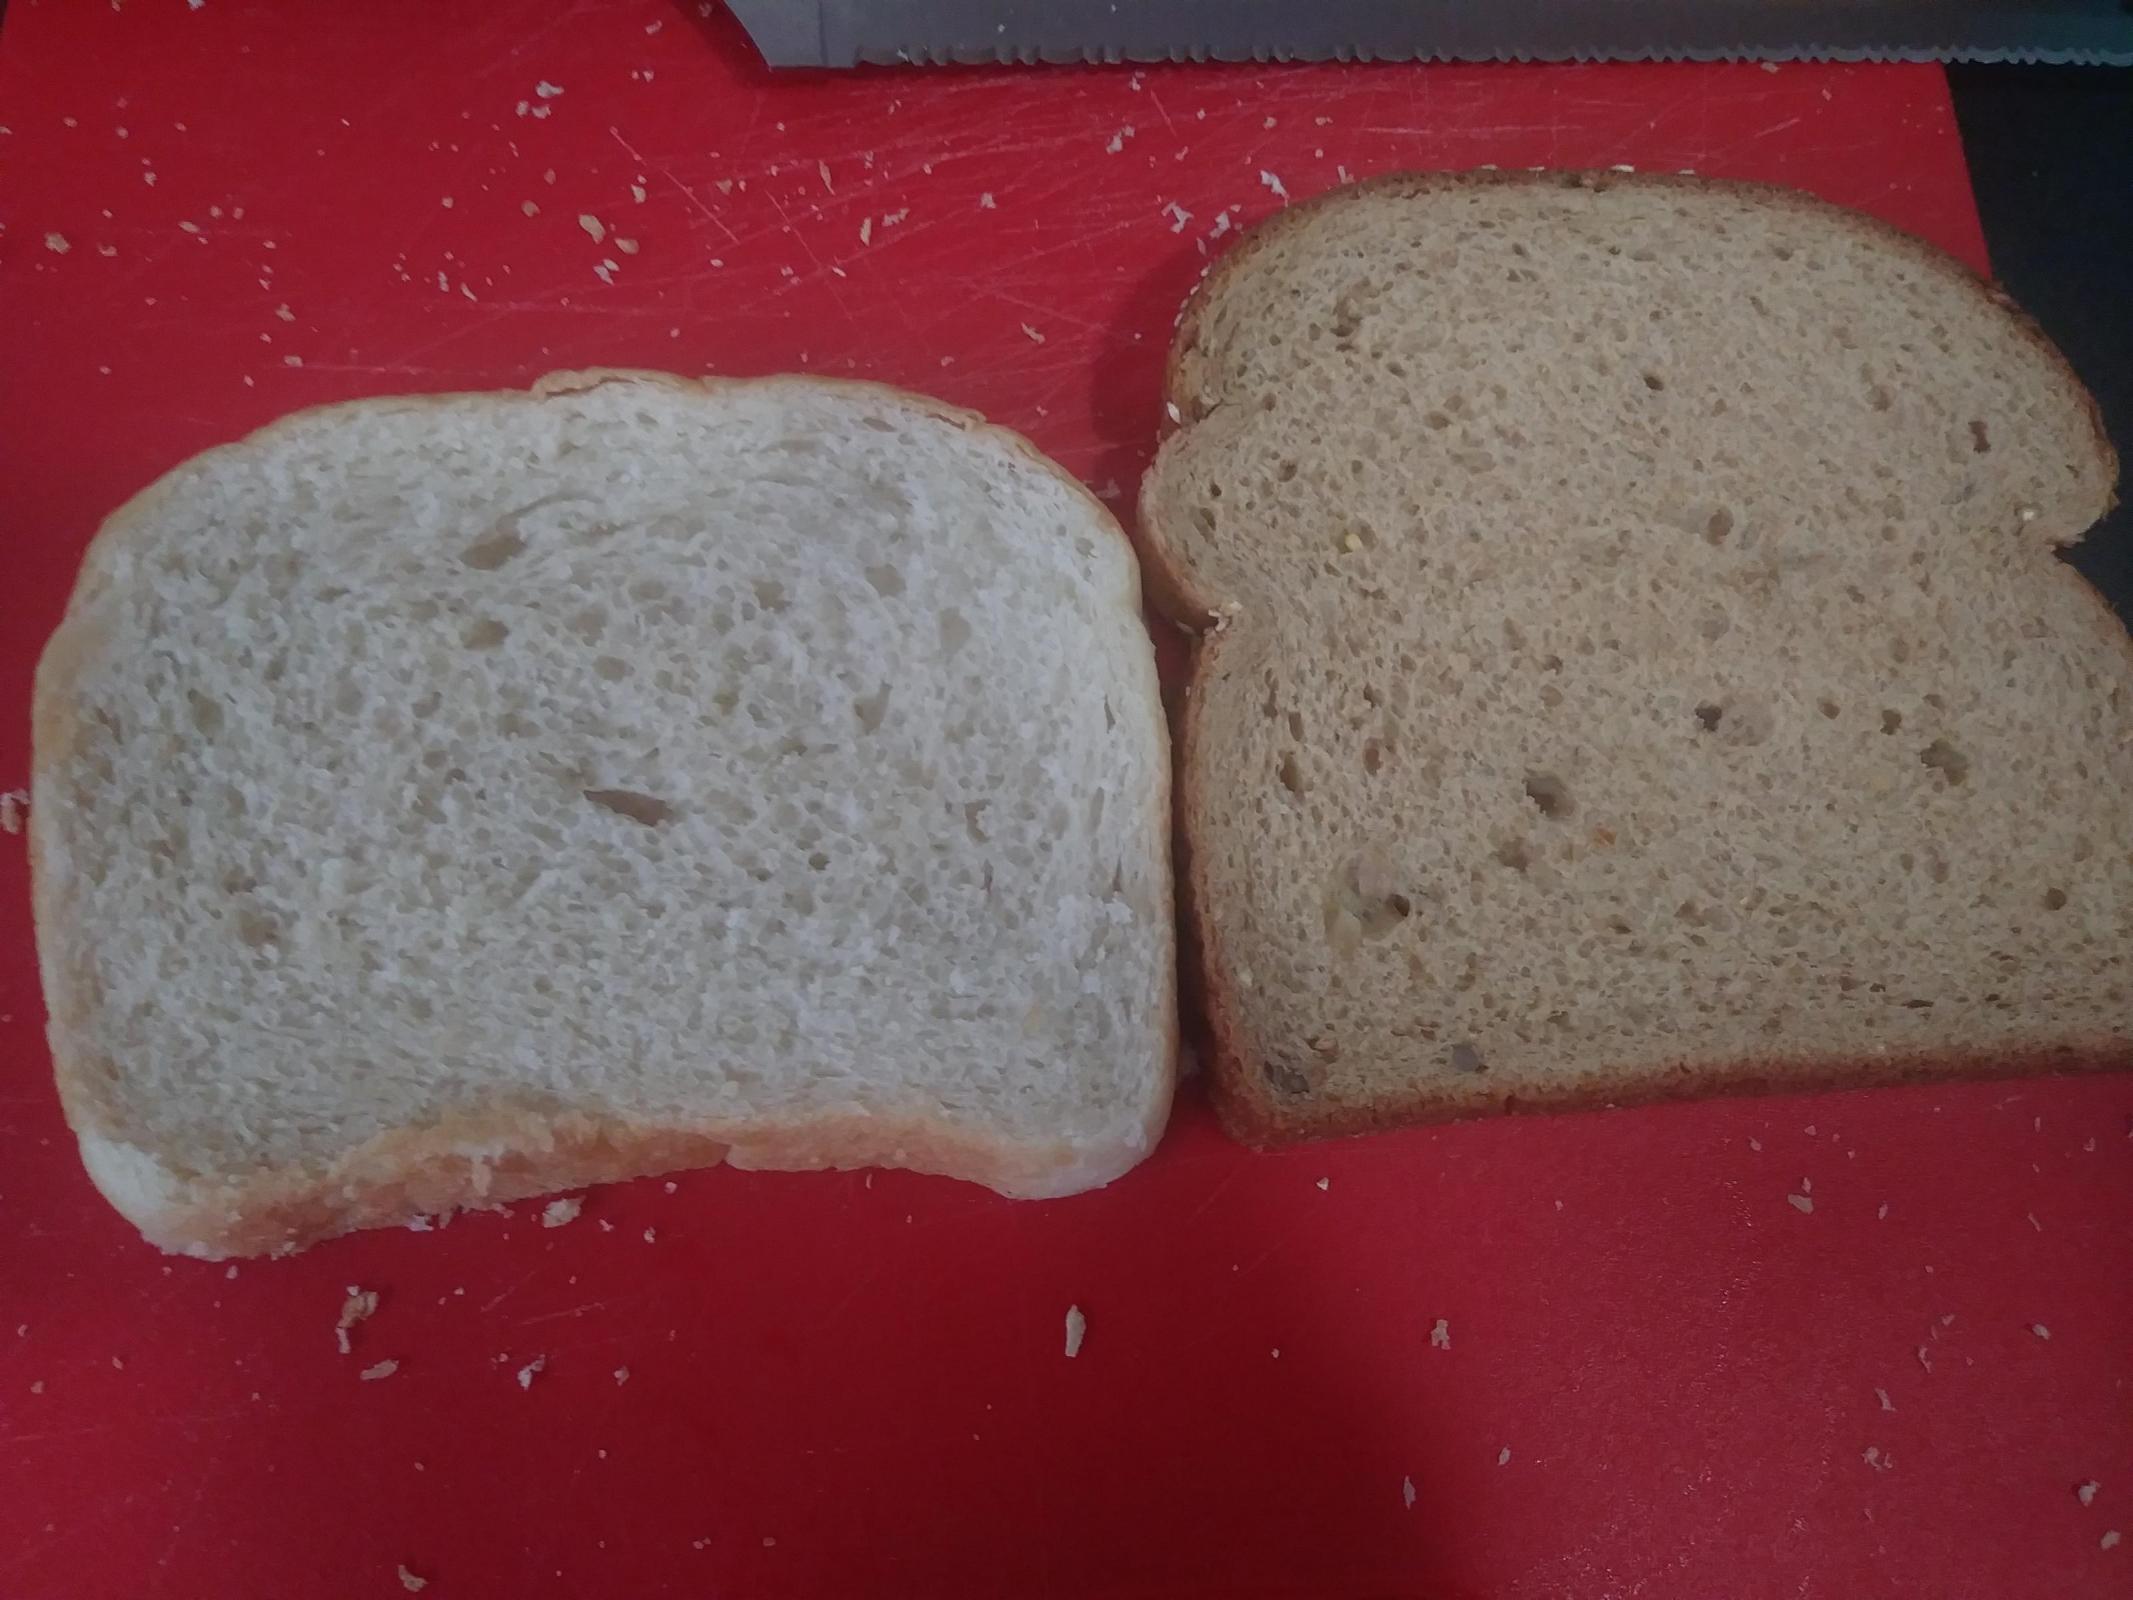 Side by side. My white loaf on the left, store bought multi-grain on the right.